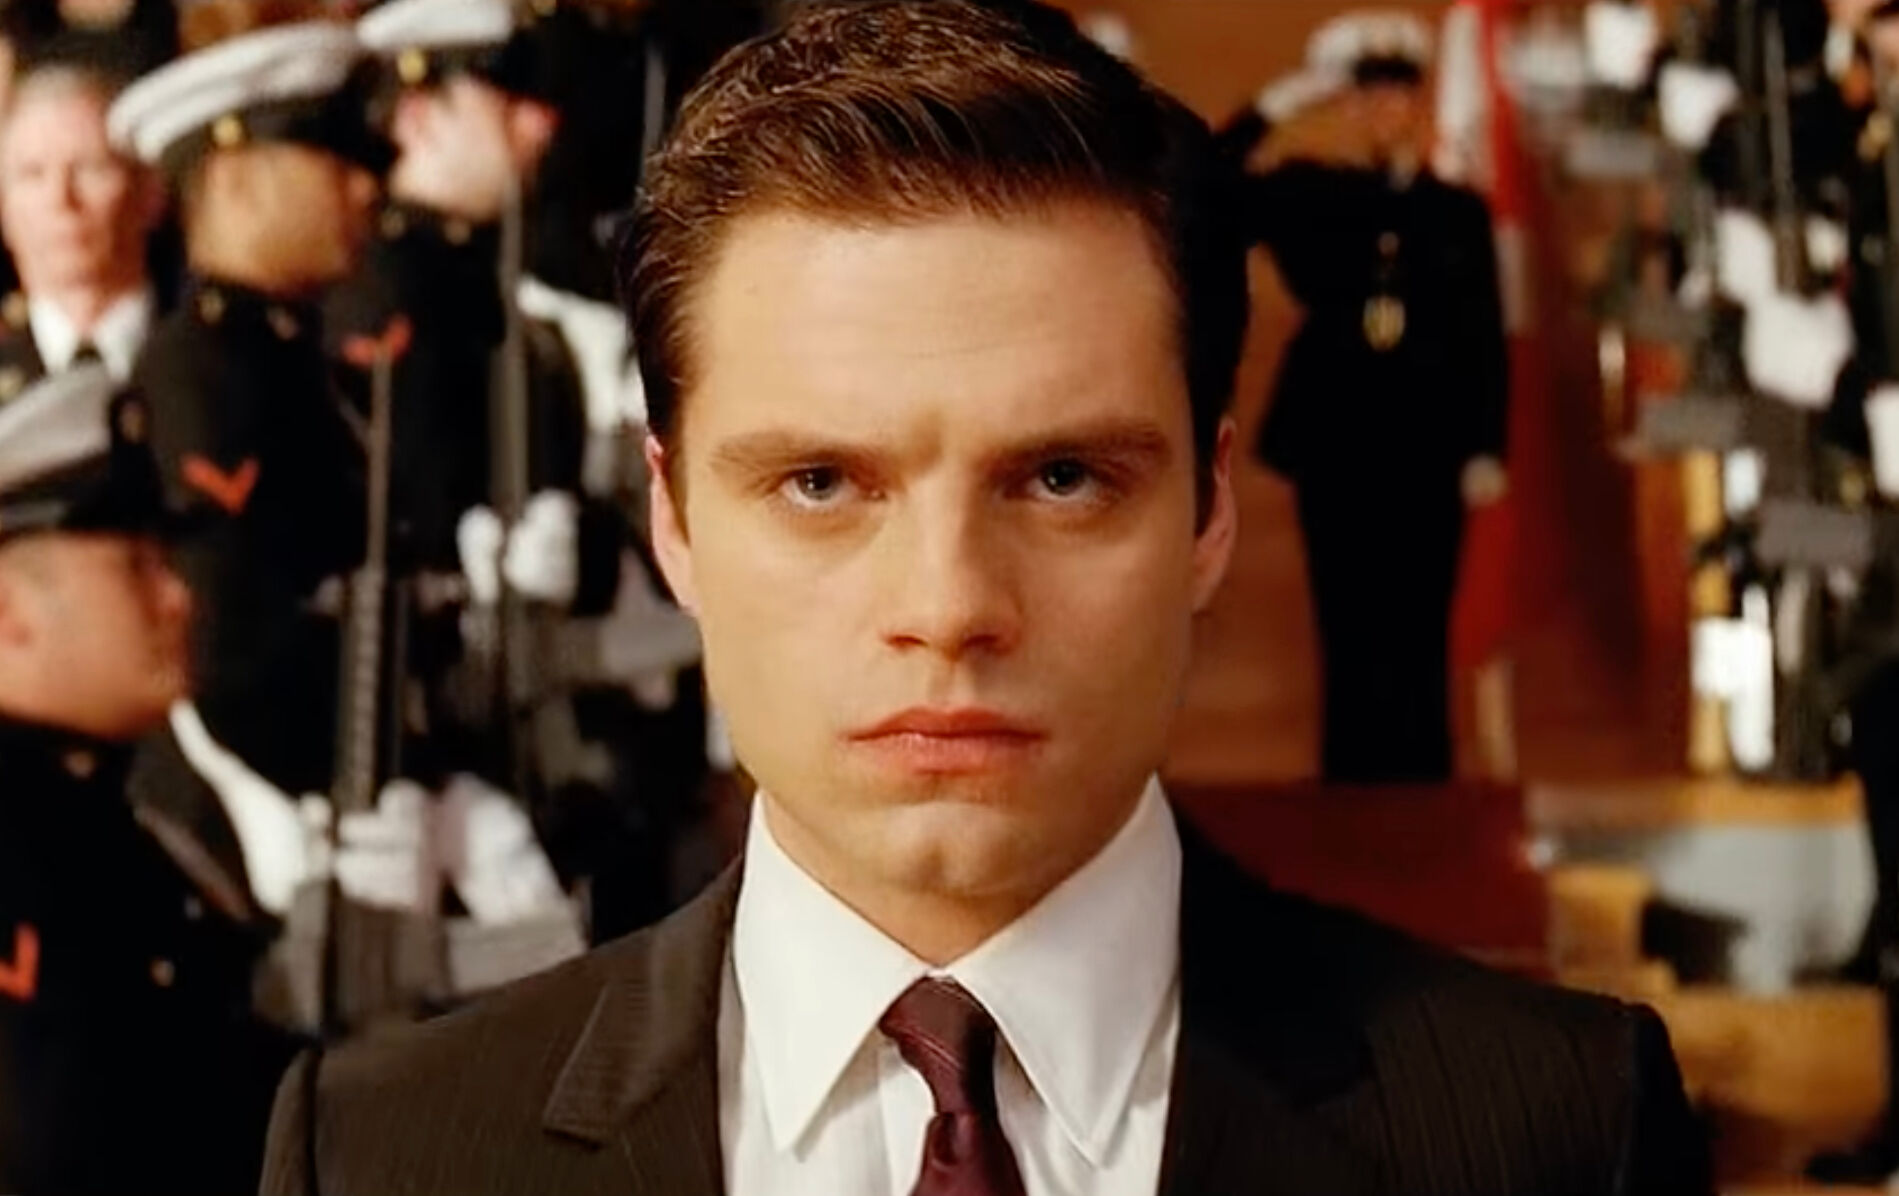 Award-winning Marvel actor Sebastian Stan once played a closeted gay prince on TV